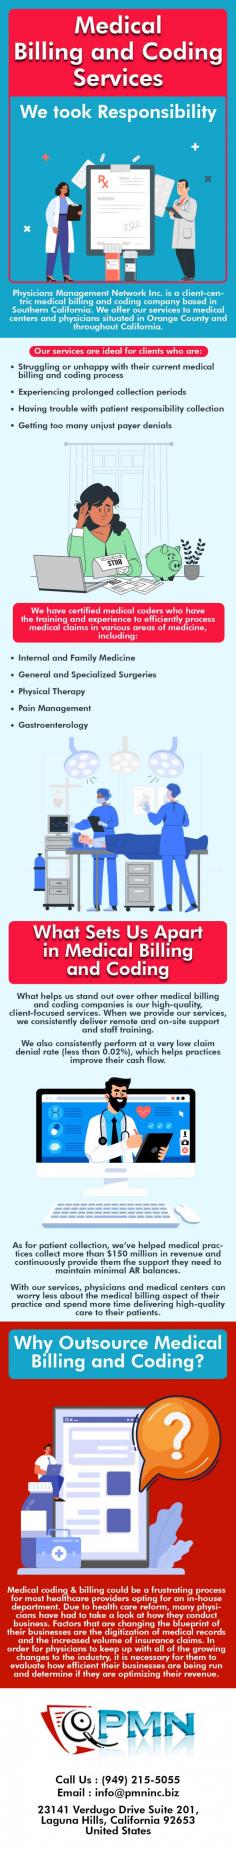 Get relief from the frustrations of in-house medical coding and billing with PMN, Inc. Our expertise helps healthcare providers navigate healthcare reforms and optimize their business practices. Contact us today to learn more about how we can support your practice.